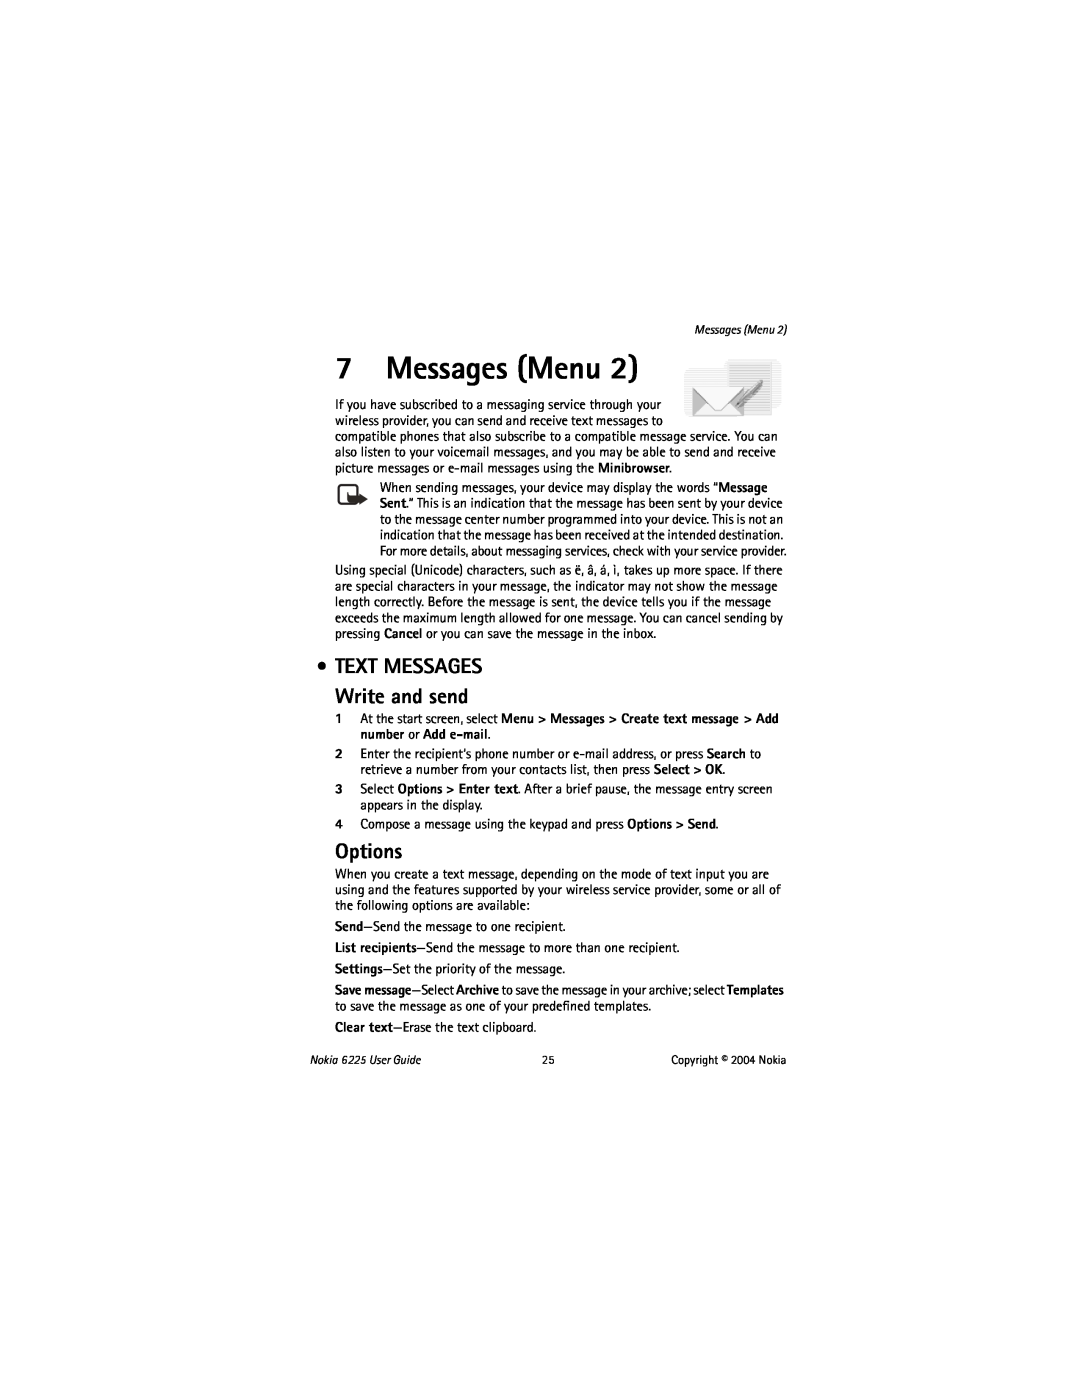 Nokia manual Messages Menu, Options, TEXT MESSAGES Write and send, Nokia 6225 User Guide 